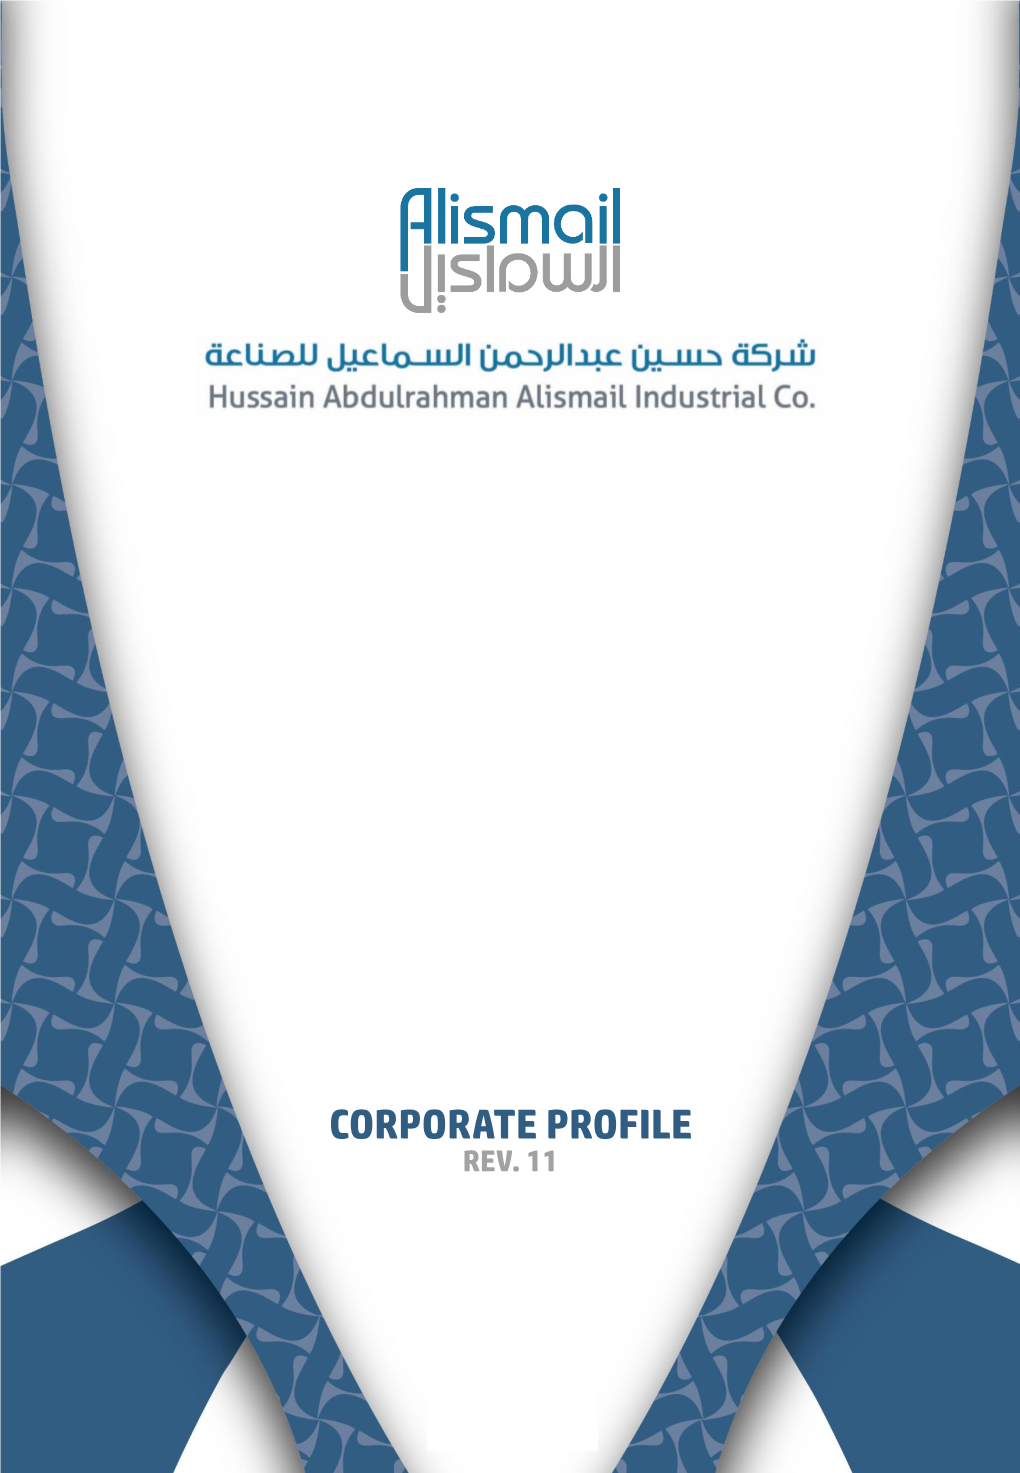 Alismail Industrial Co